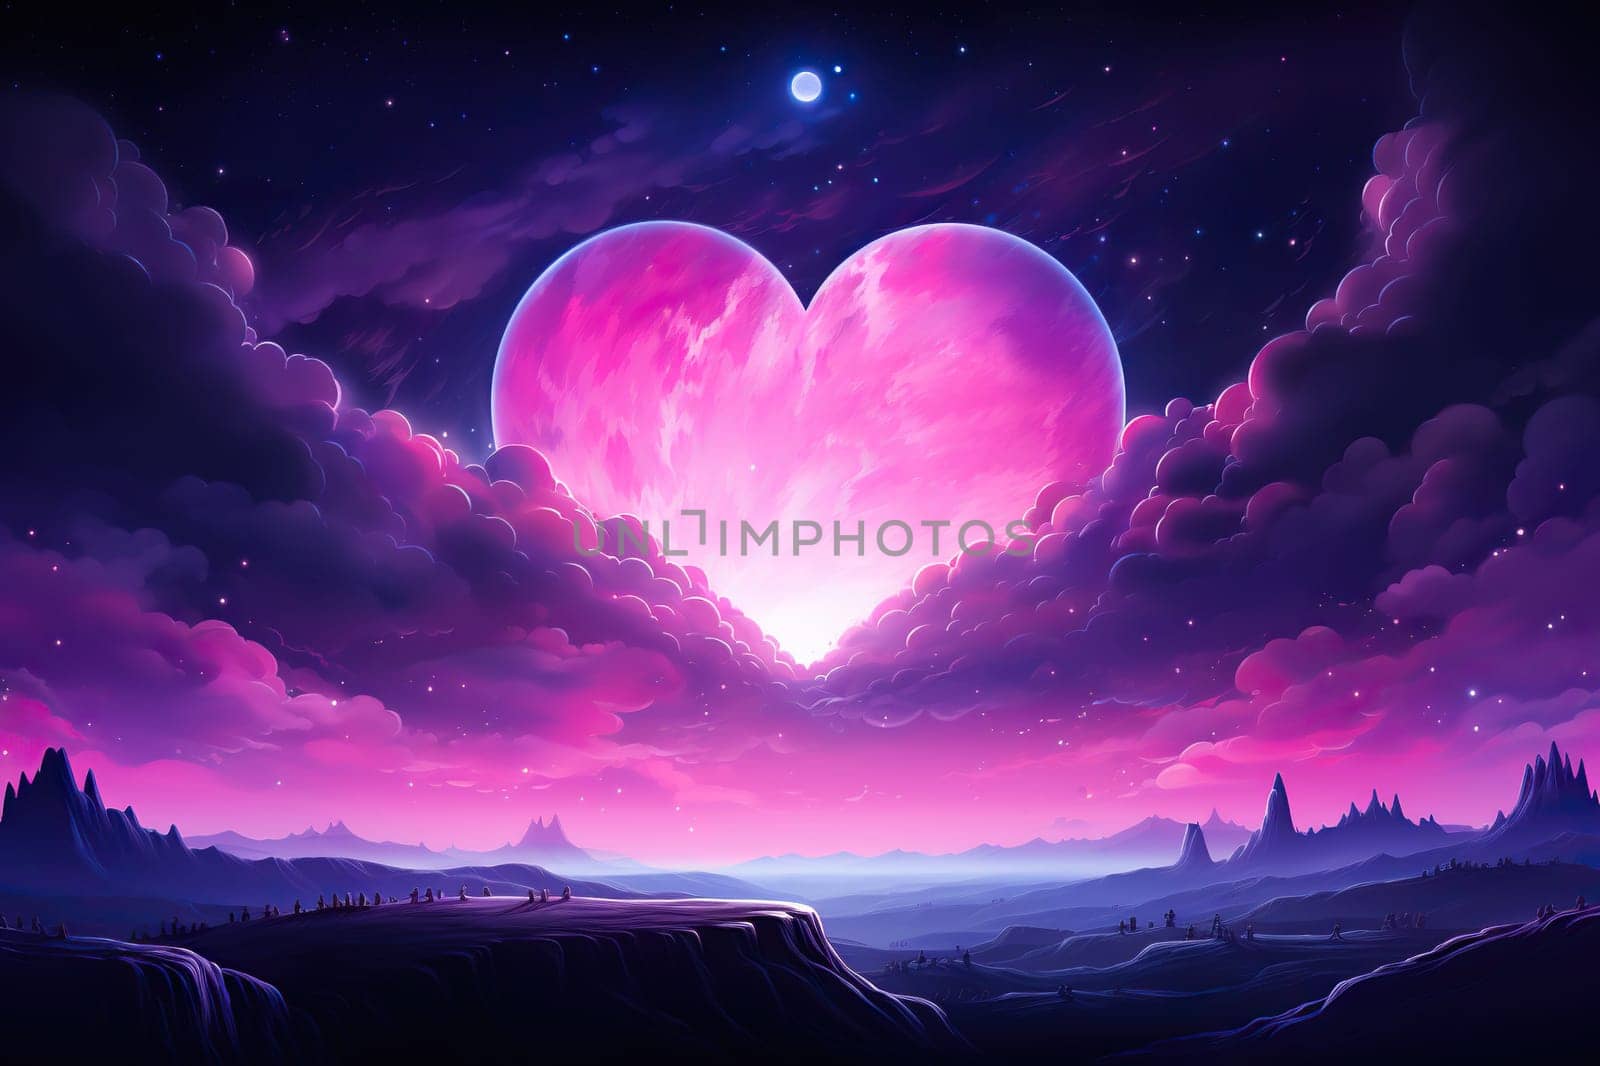 Huge pink heart in the night sky. Romantic illustration.